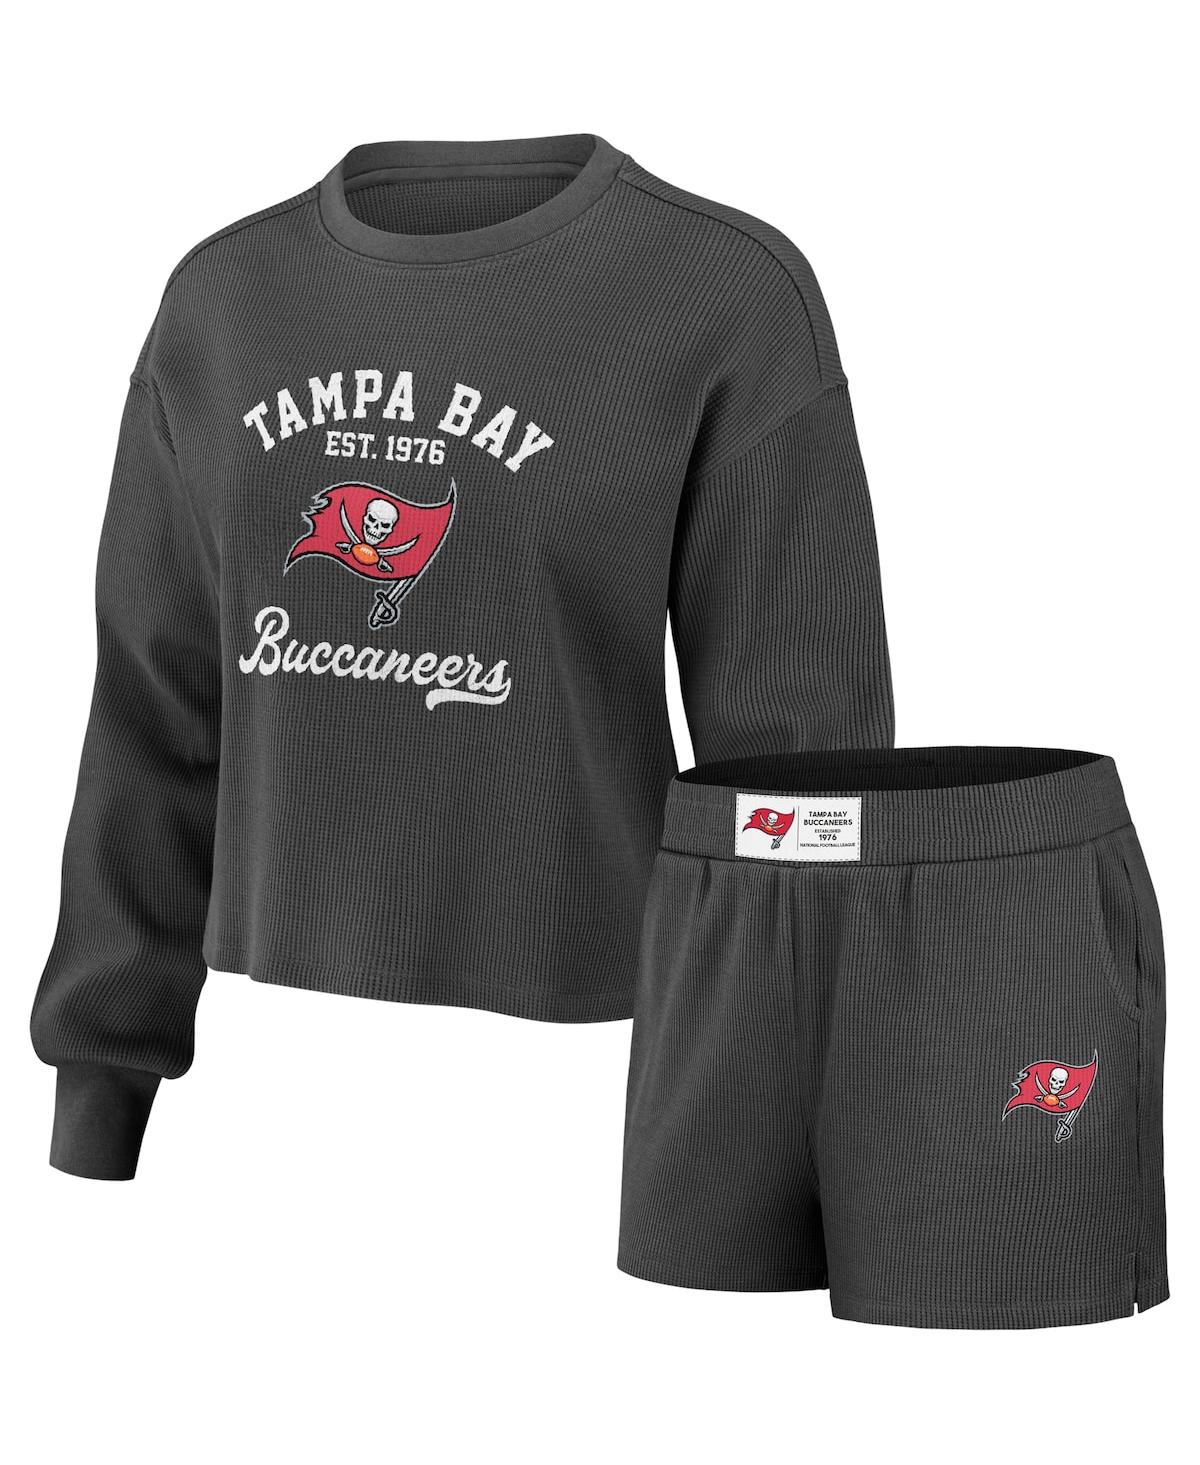 Wear By Erin Andrews Women's  Pewter Distressed Tampa Bay Buccaneers Waffle Knit Long Sleeve T-shirt